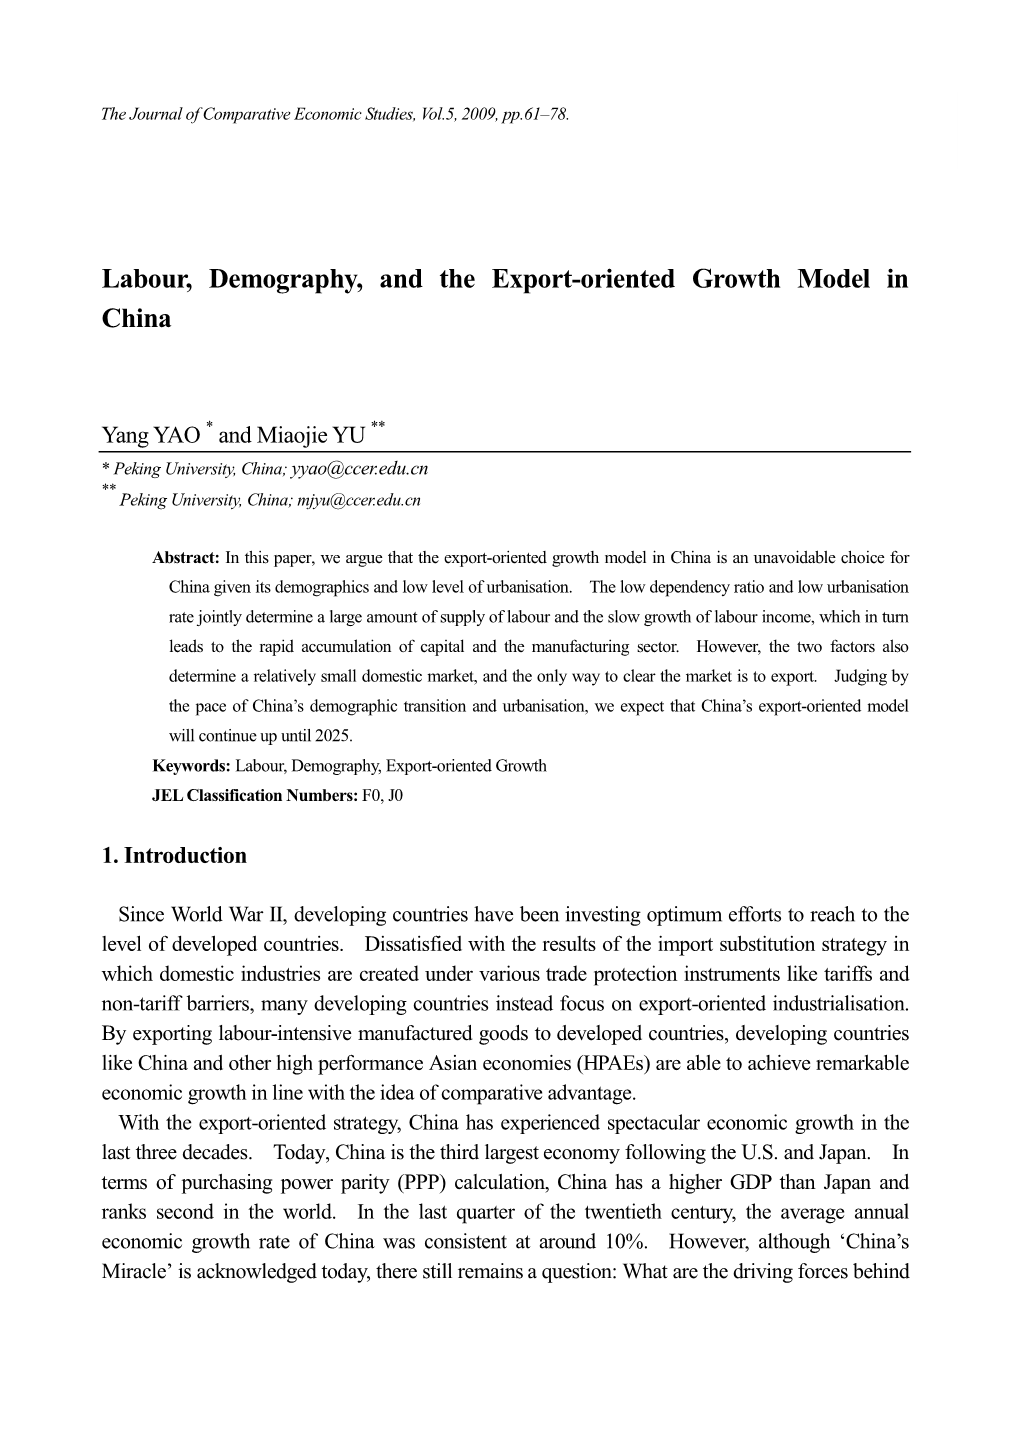 Labour, Demography, and the Export-Oriented Growth Model in China